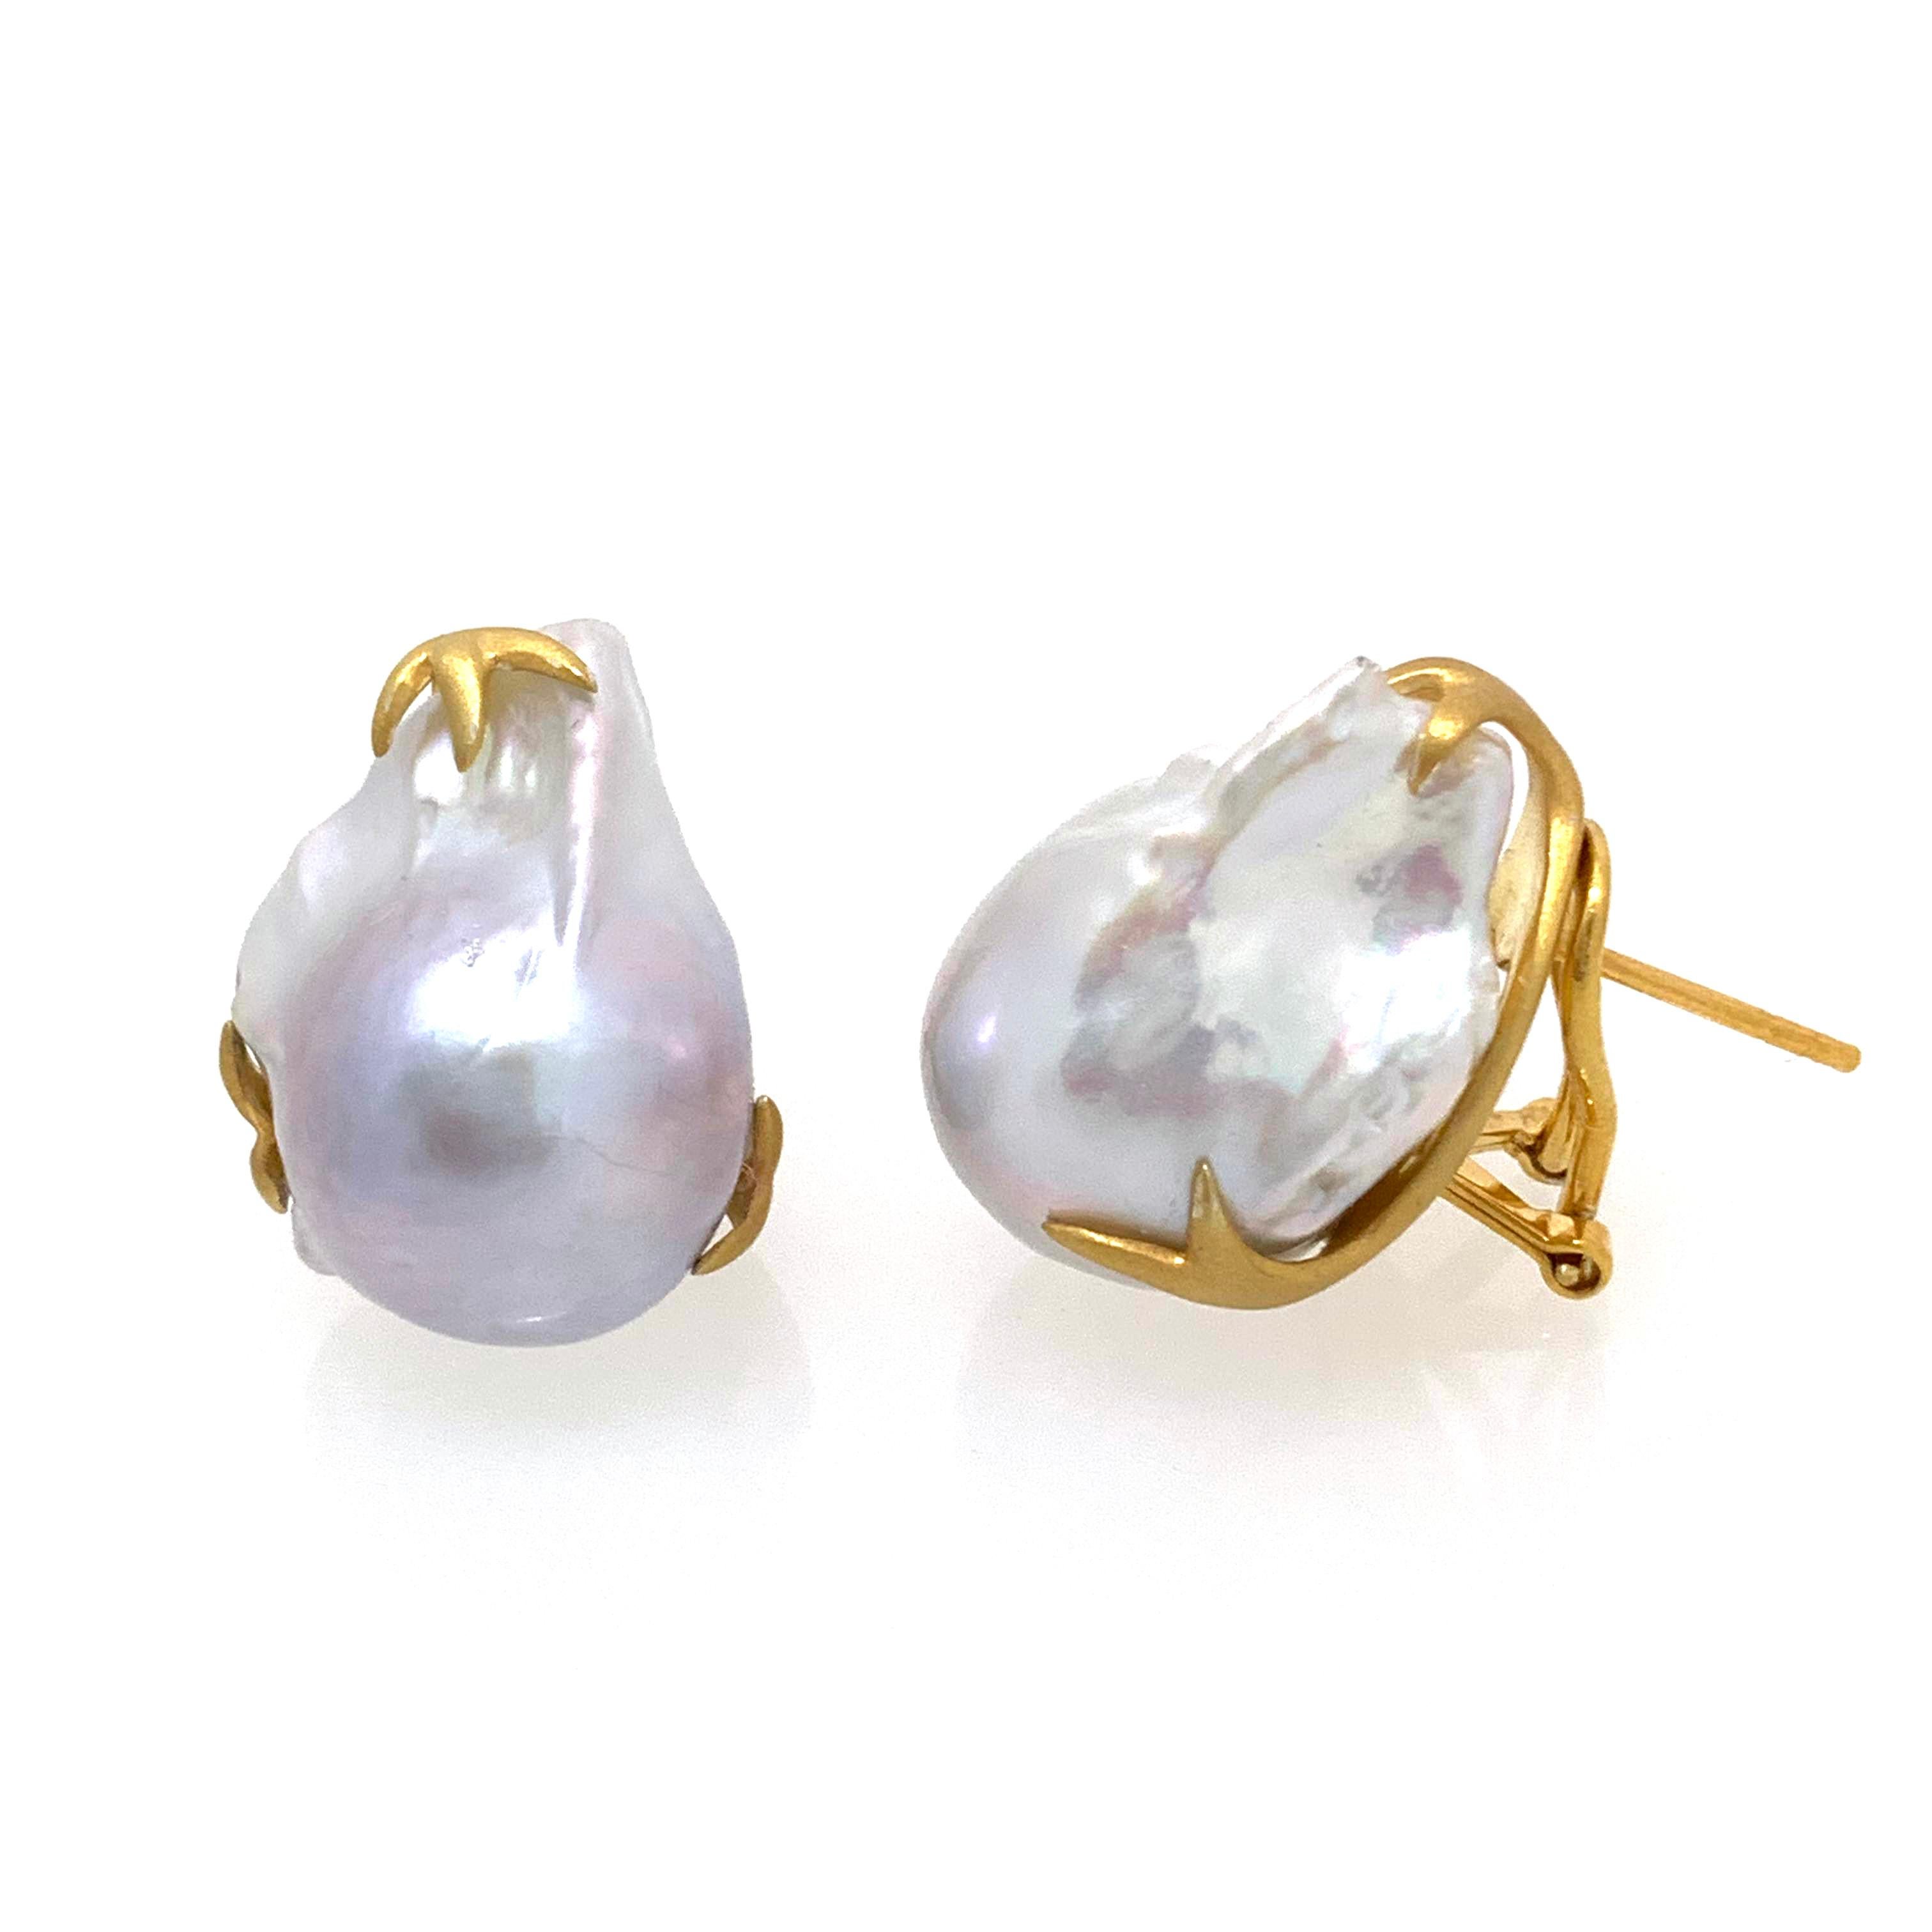 Beautiful pair of large lustrous freshwater baroque pearl earrings. The pair measures 16mm width and 22mm height, handset in vermeil 18k gold-plated sterling silver (matte finish). Post-clip backs provide addition support and allow the earrings to